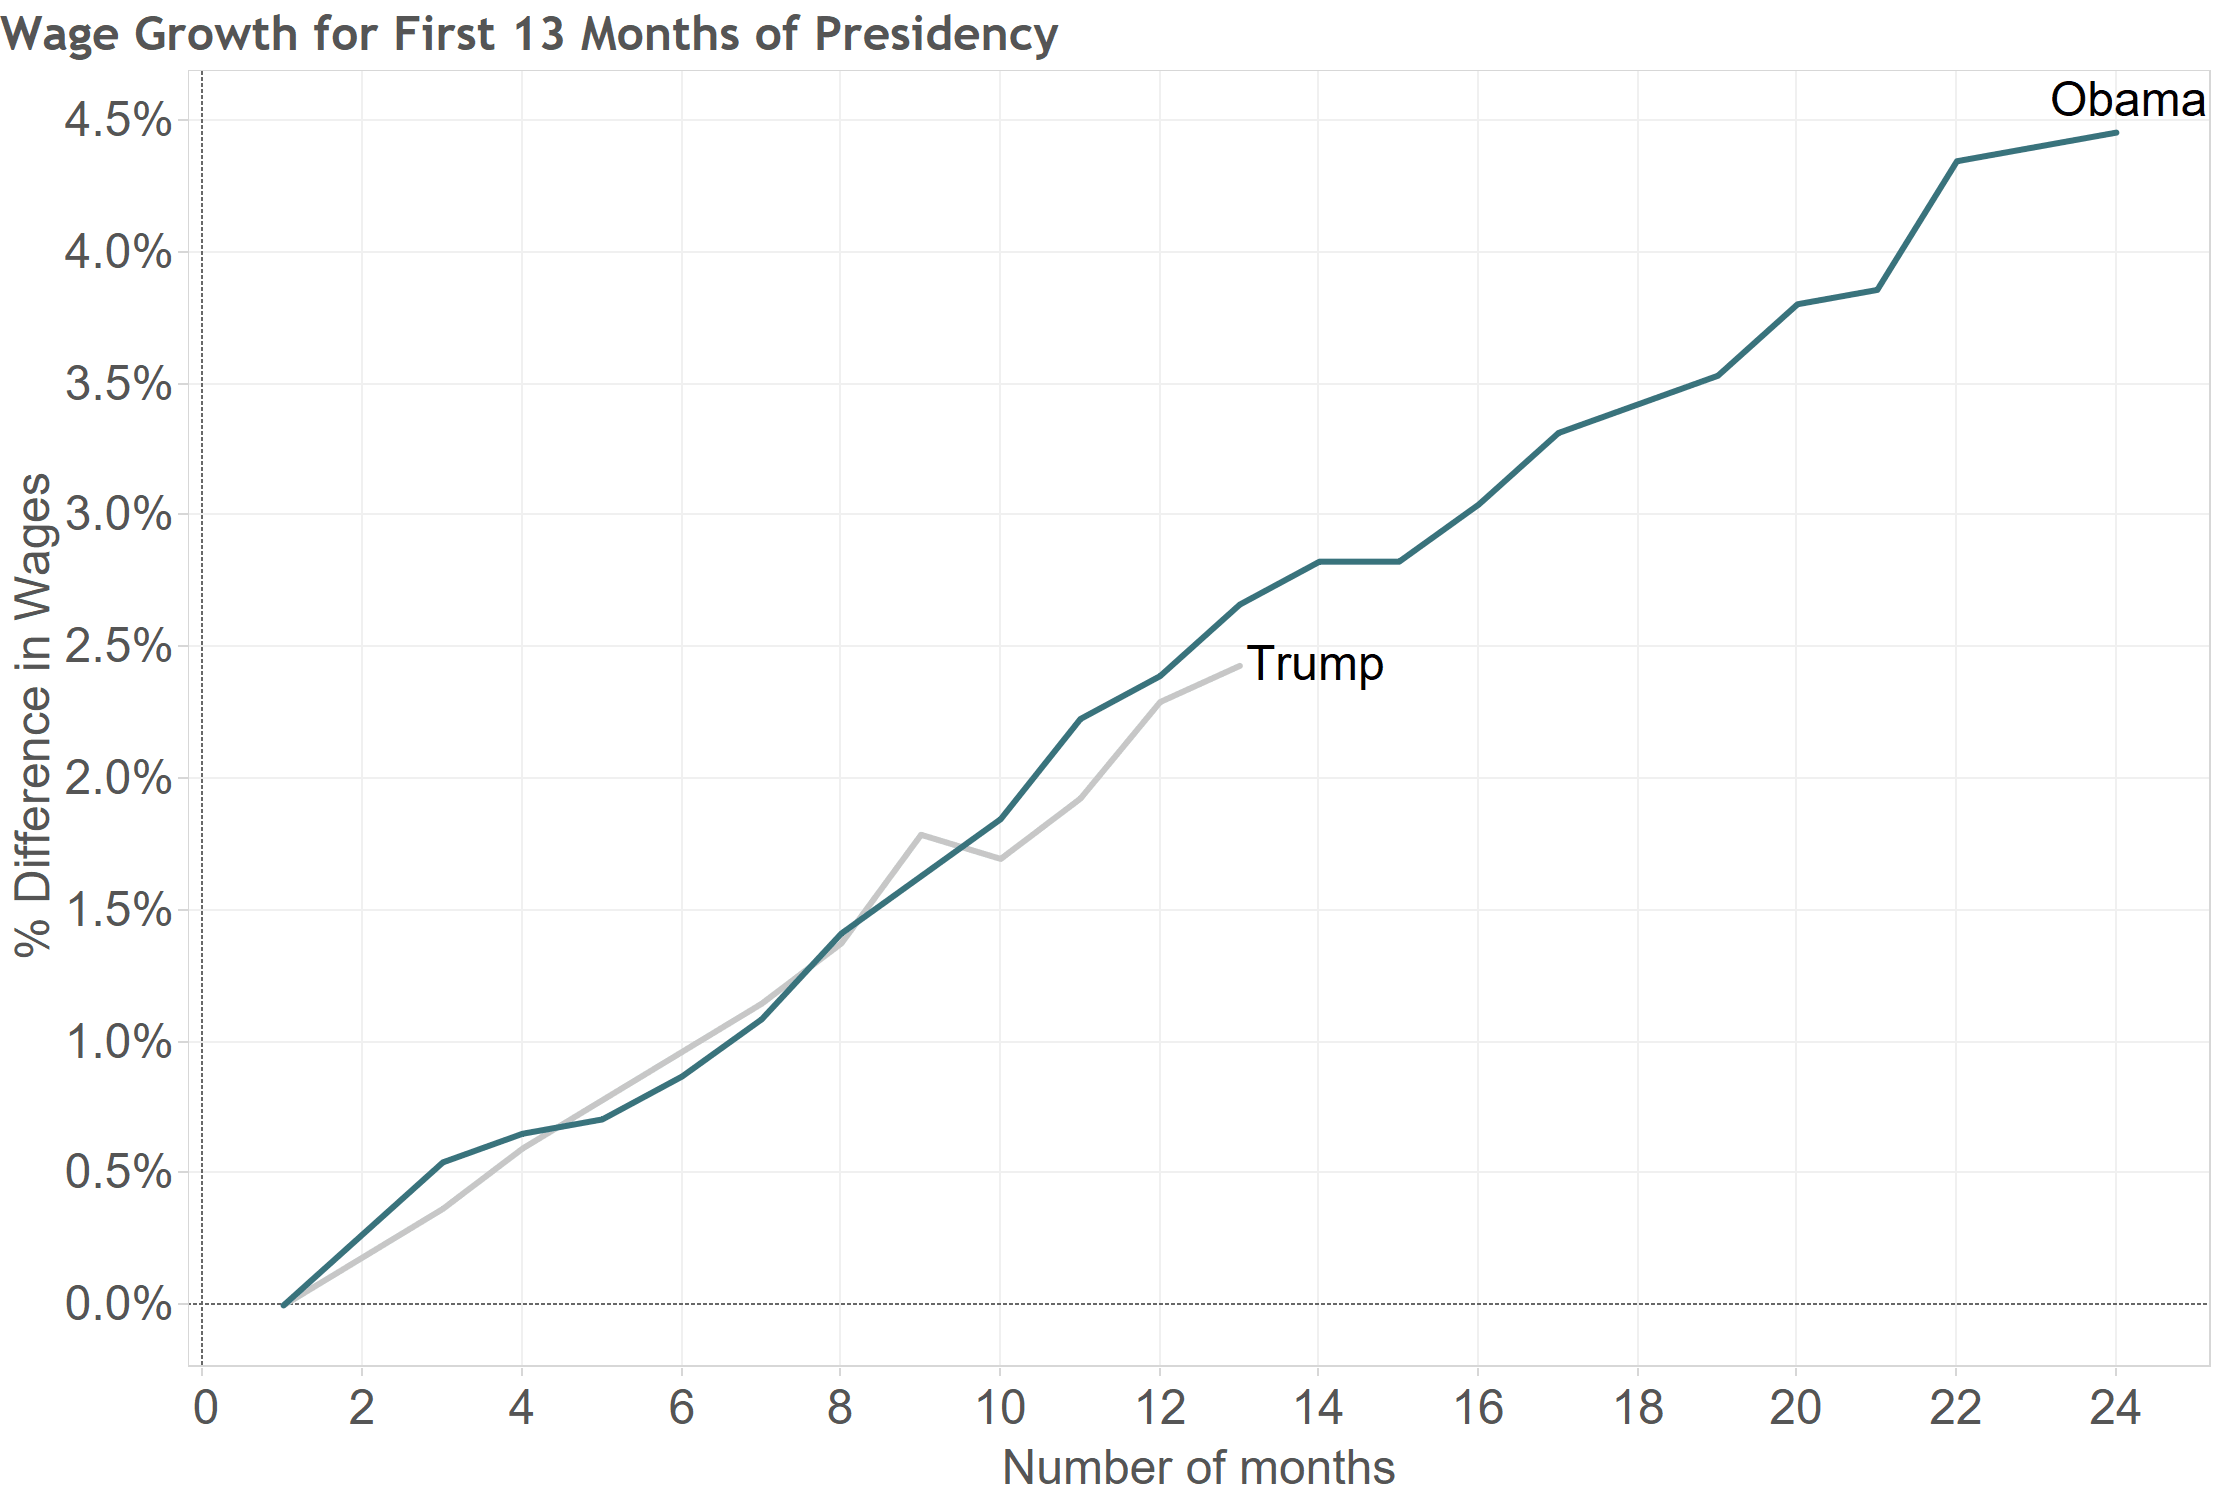 Job Growth By President Chart